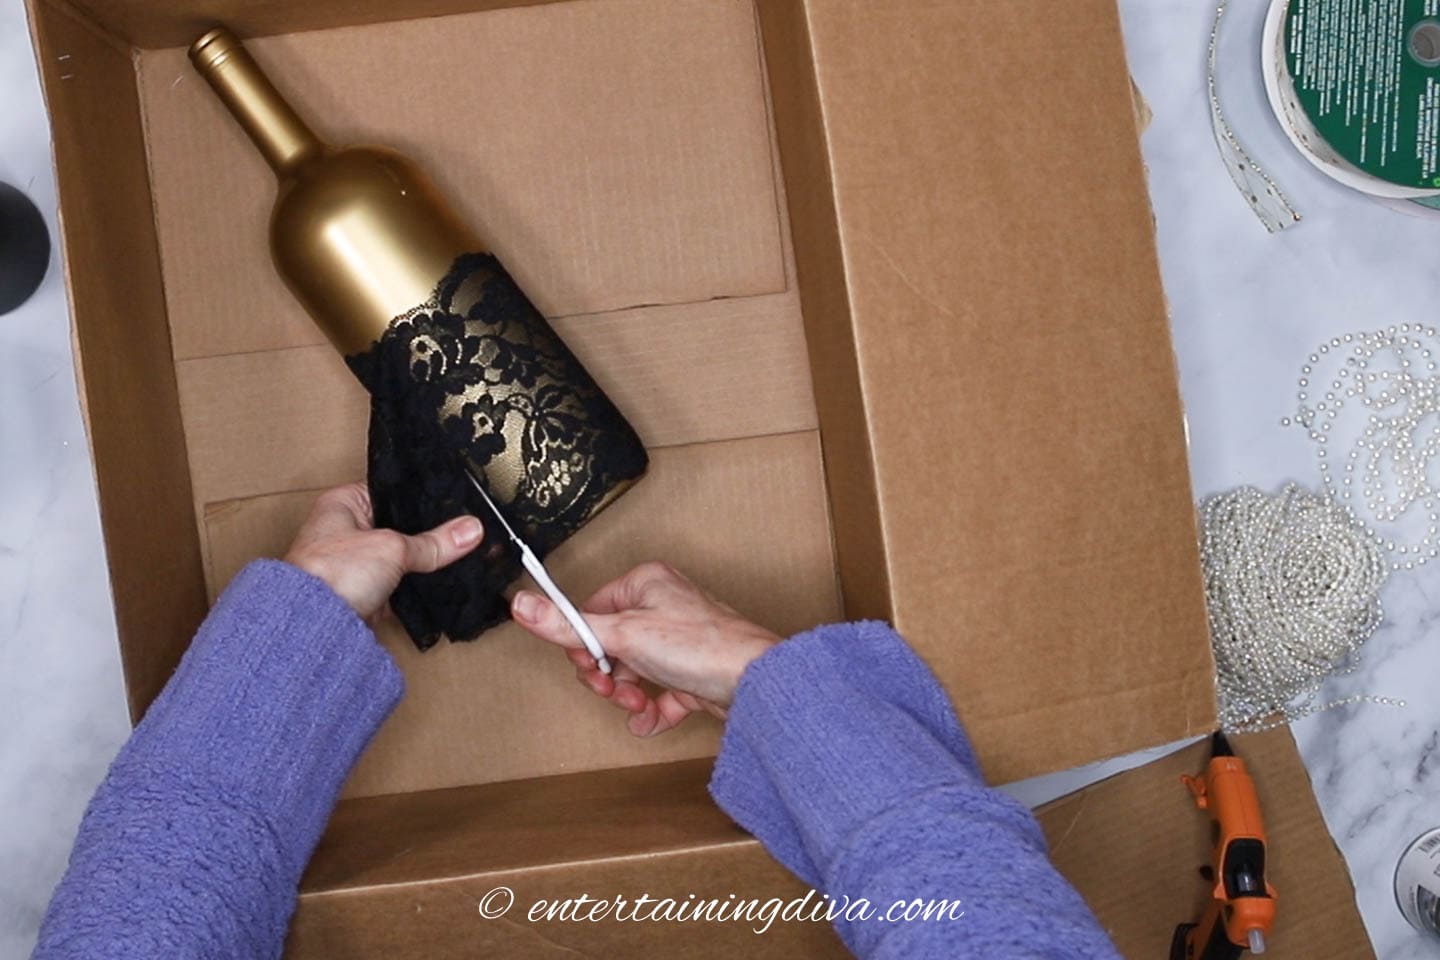 black lace being cut off from the gold wine bottle